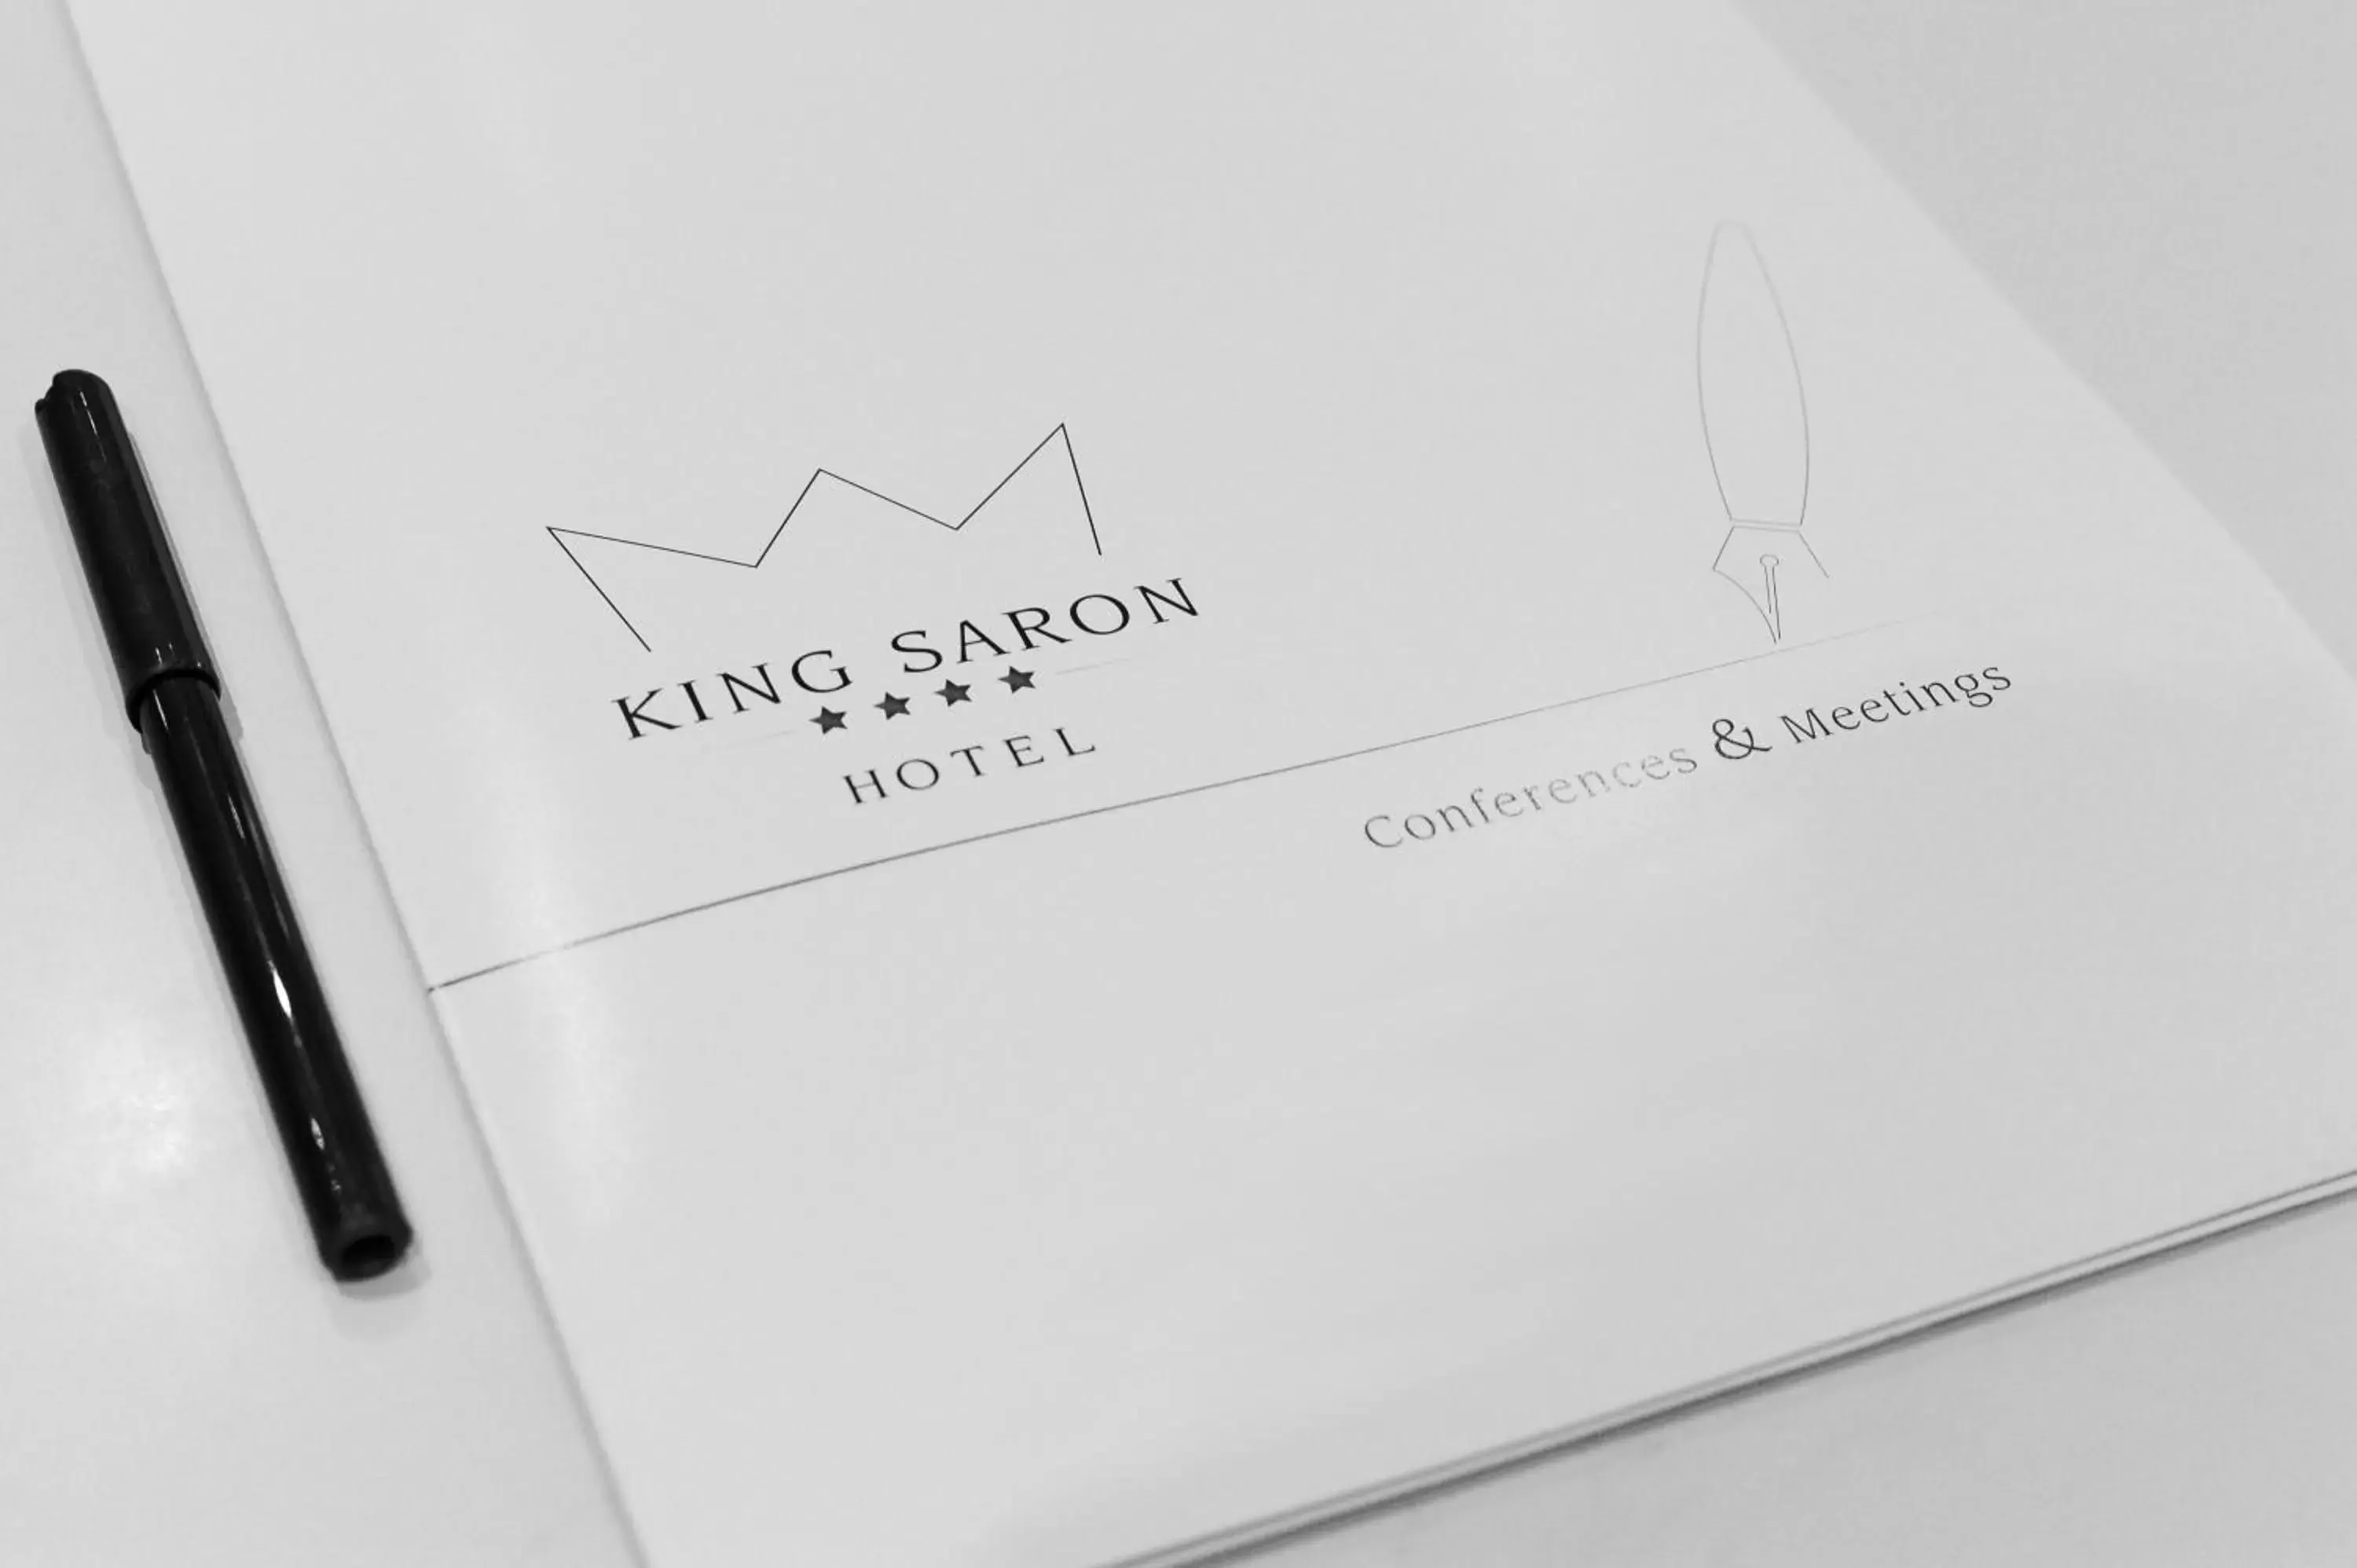 Business facilities in Hotel King Saron